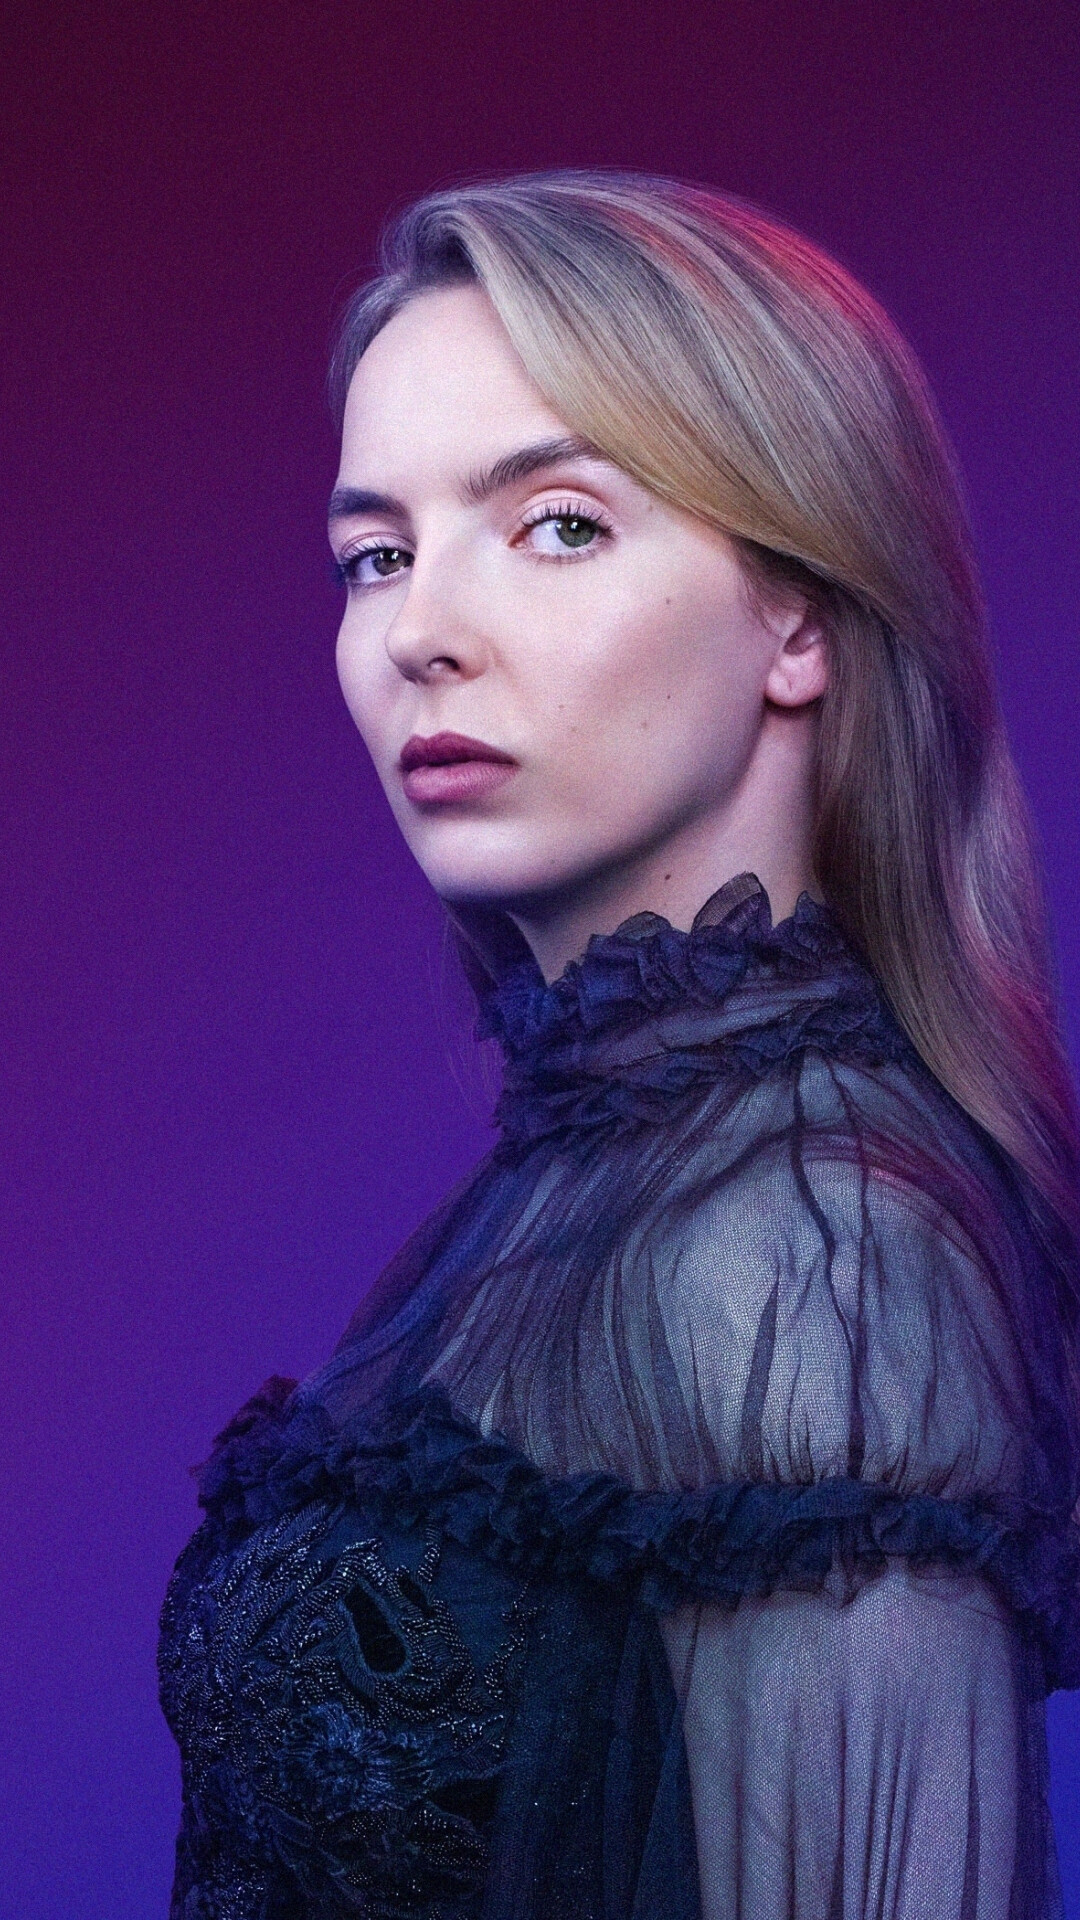 Killing Eve: Villanelle, portrayed by English actress Jodie Comer. 1080x1920 Full HD Wallpaper.